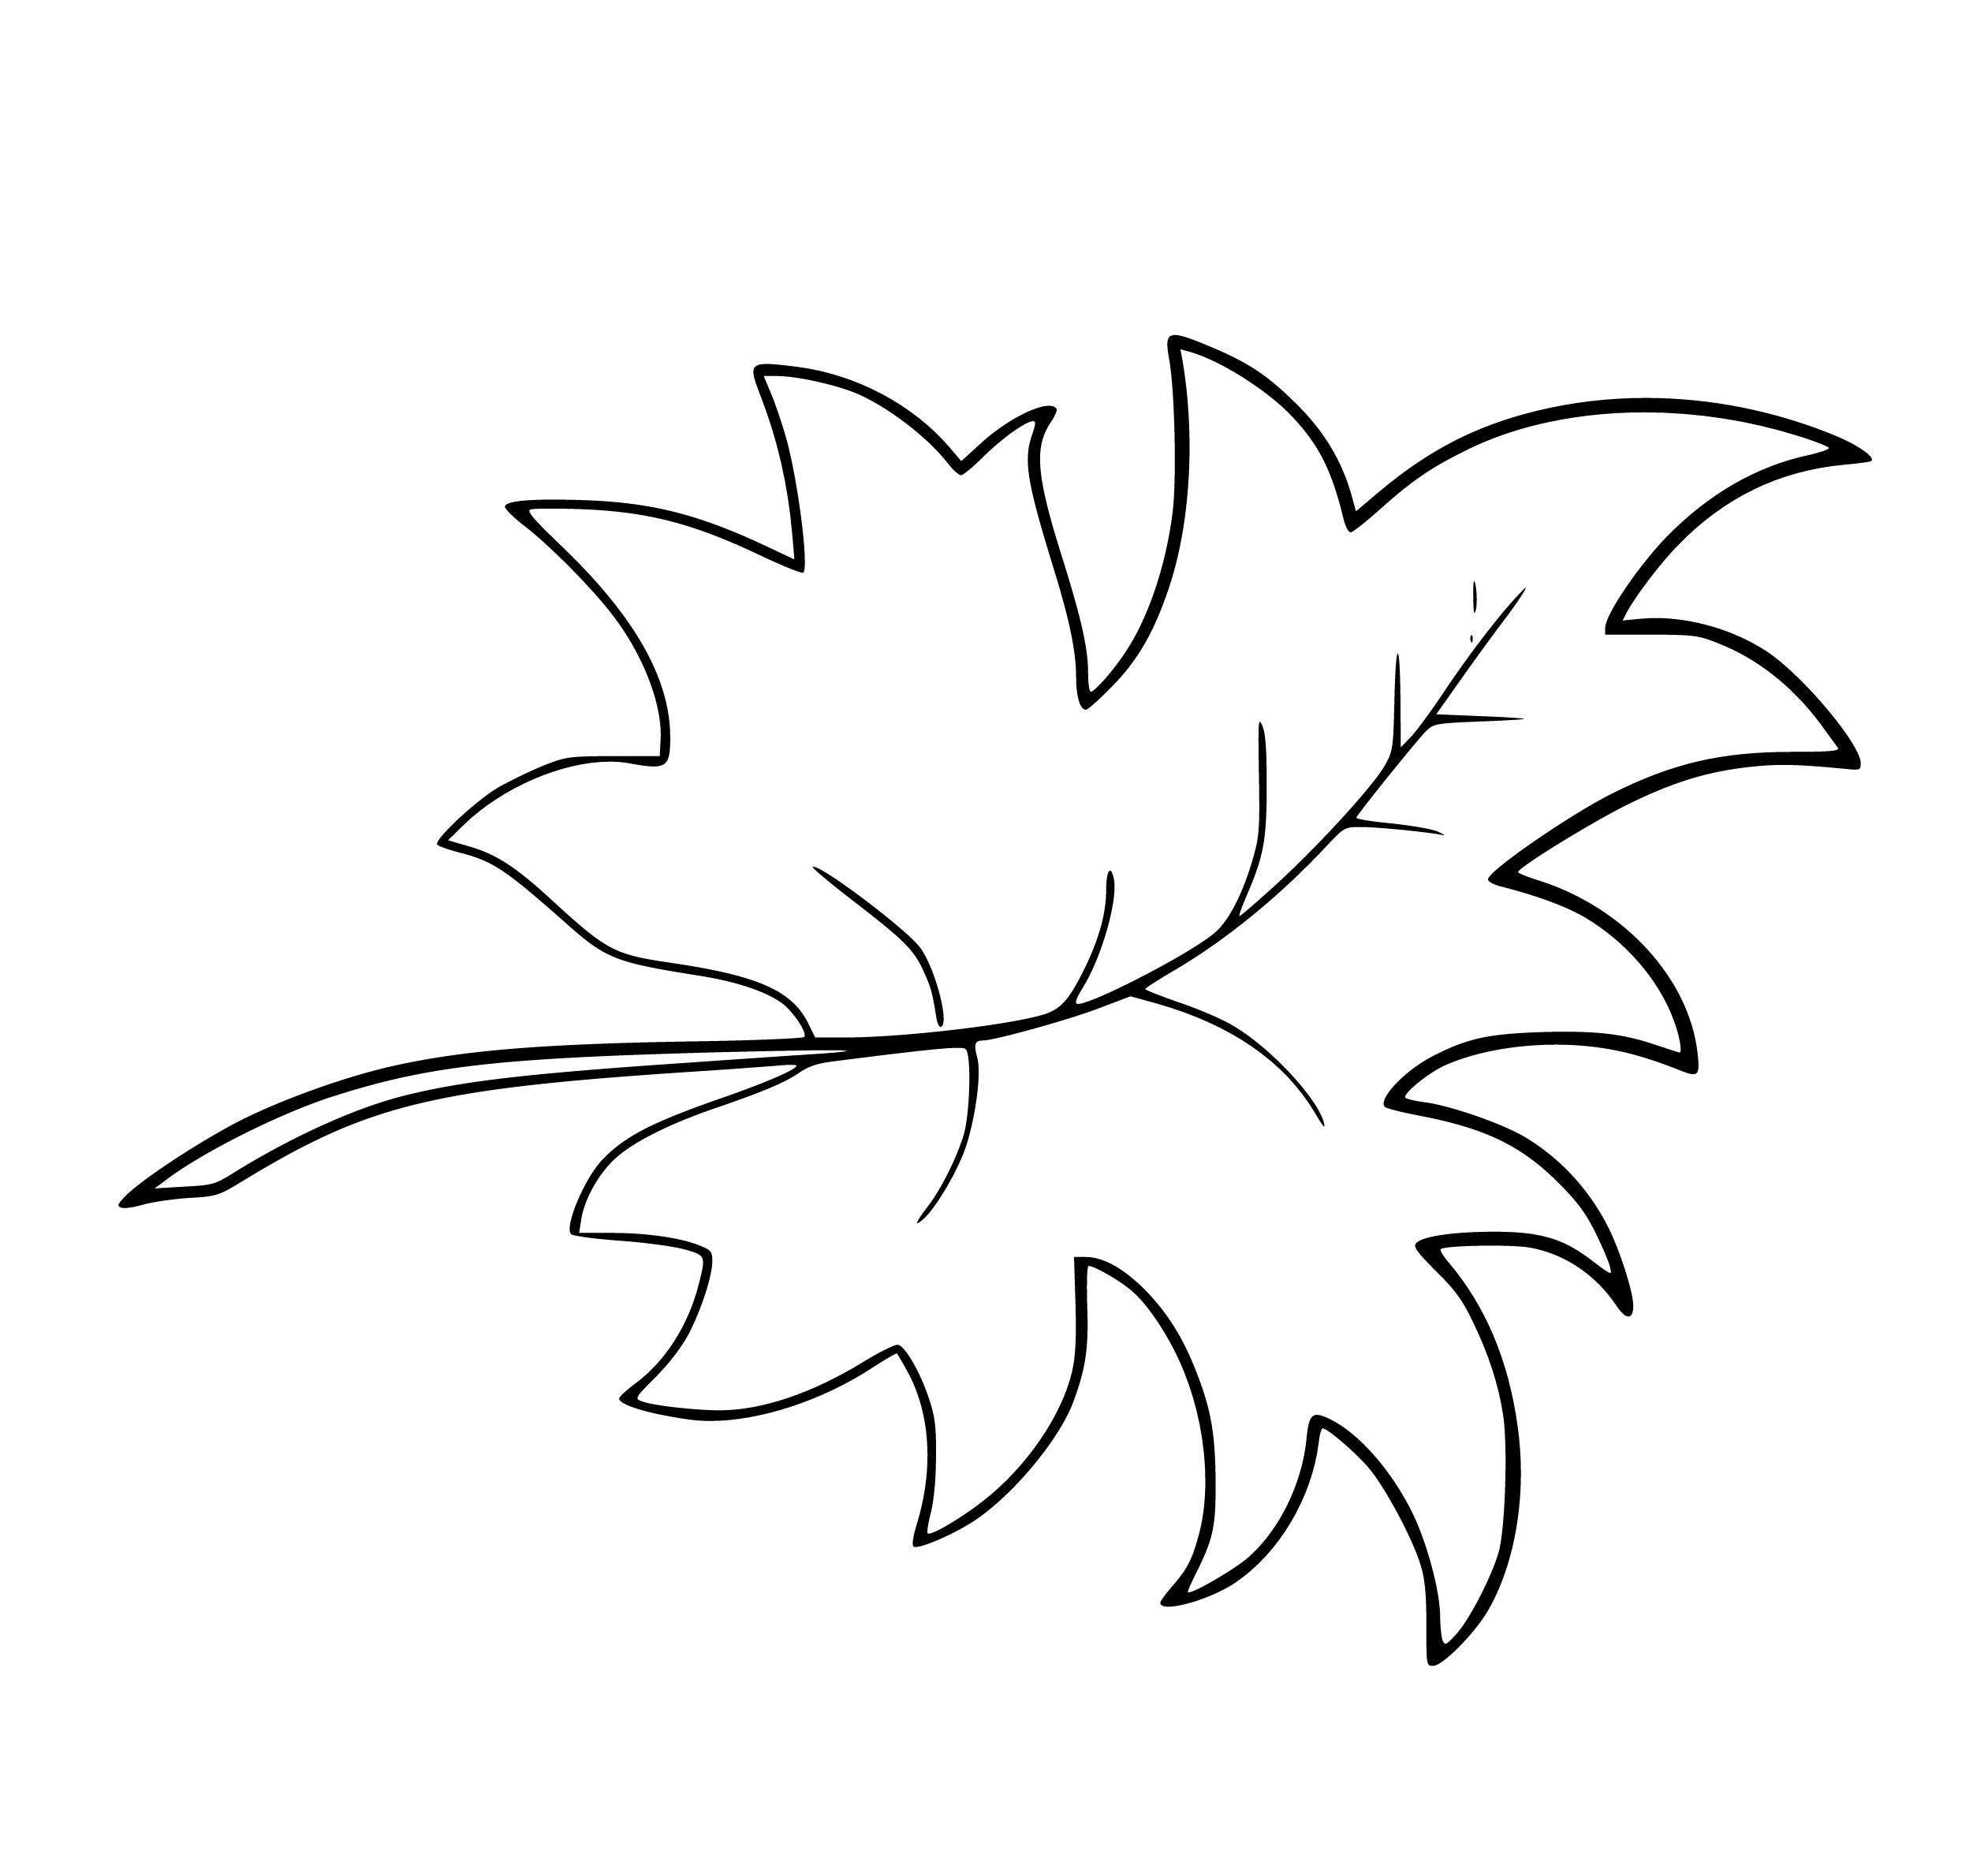 Printable Maple Leaf Coloring Page for kids.